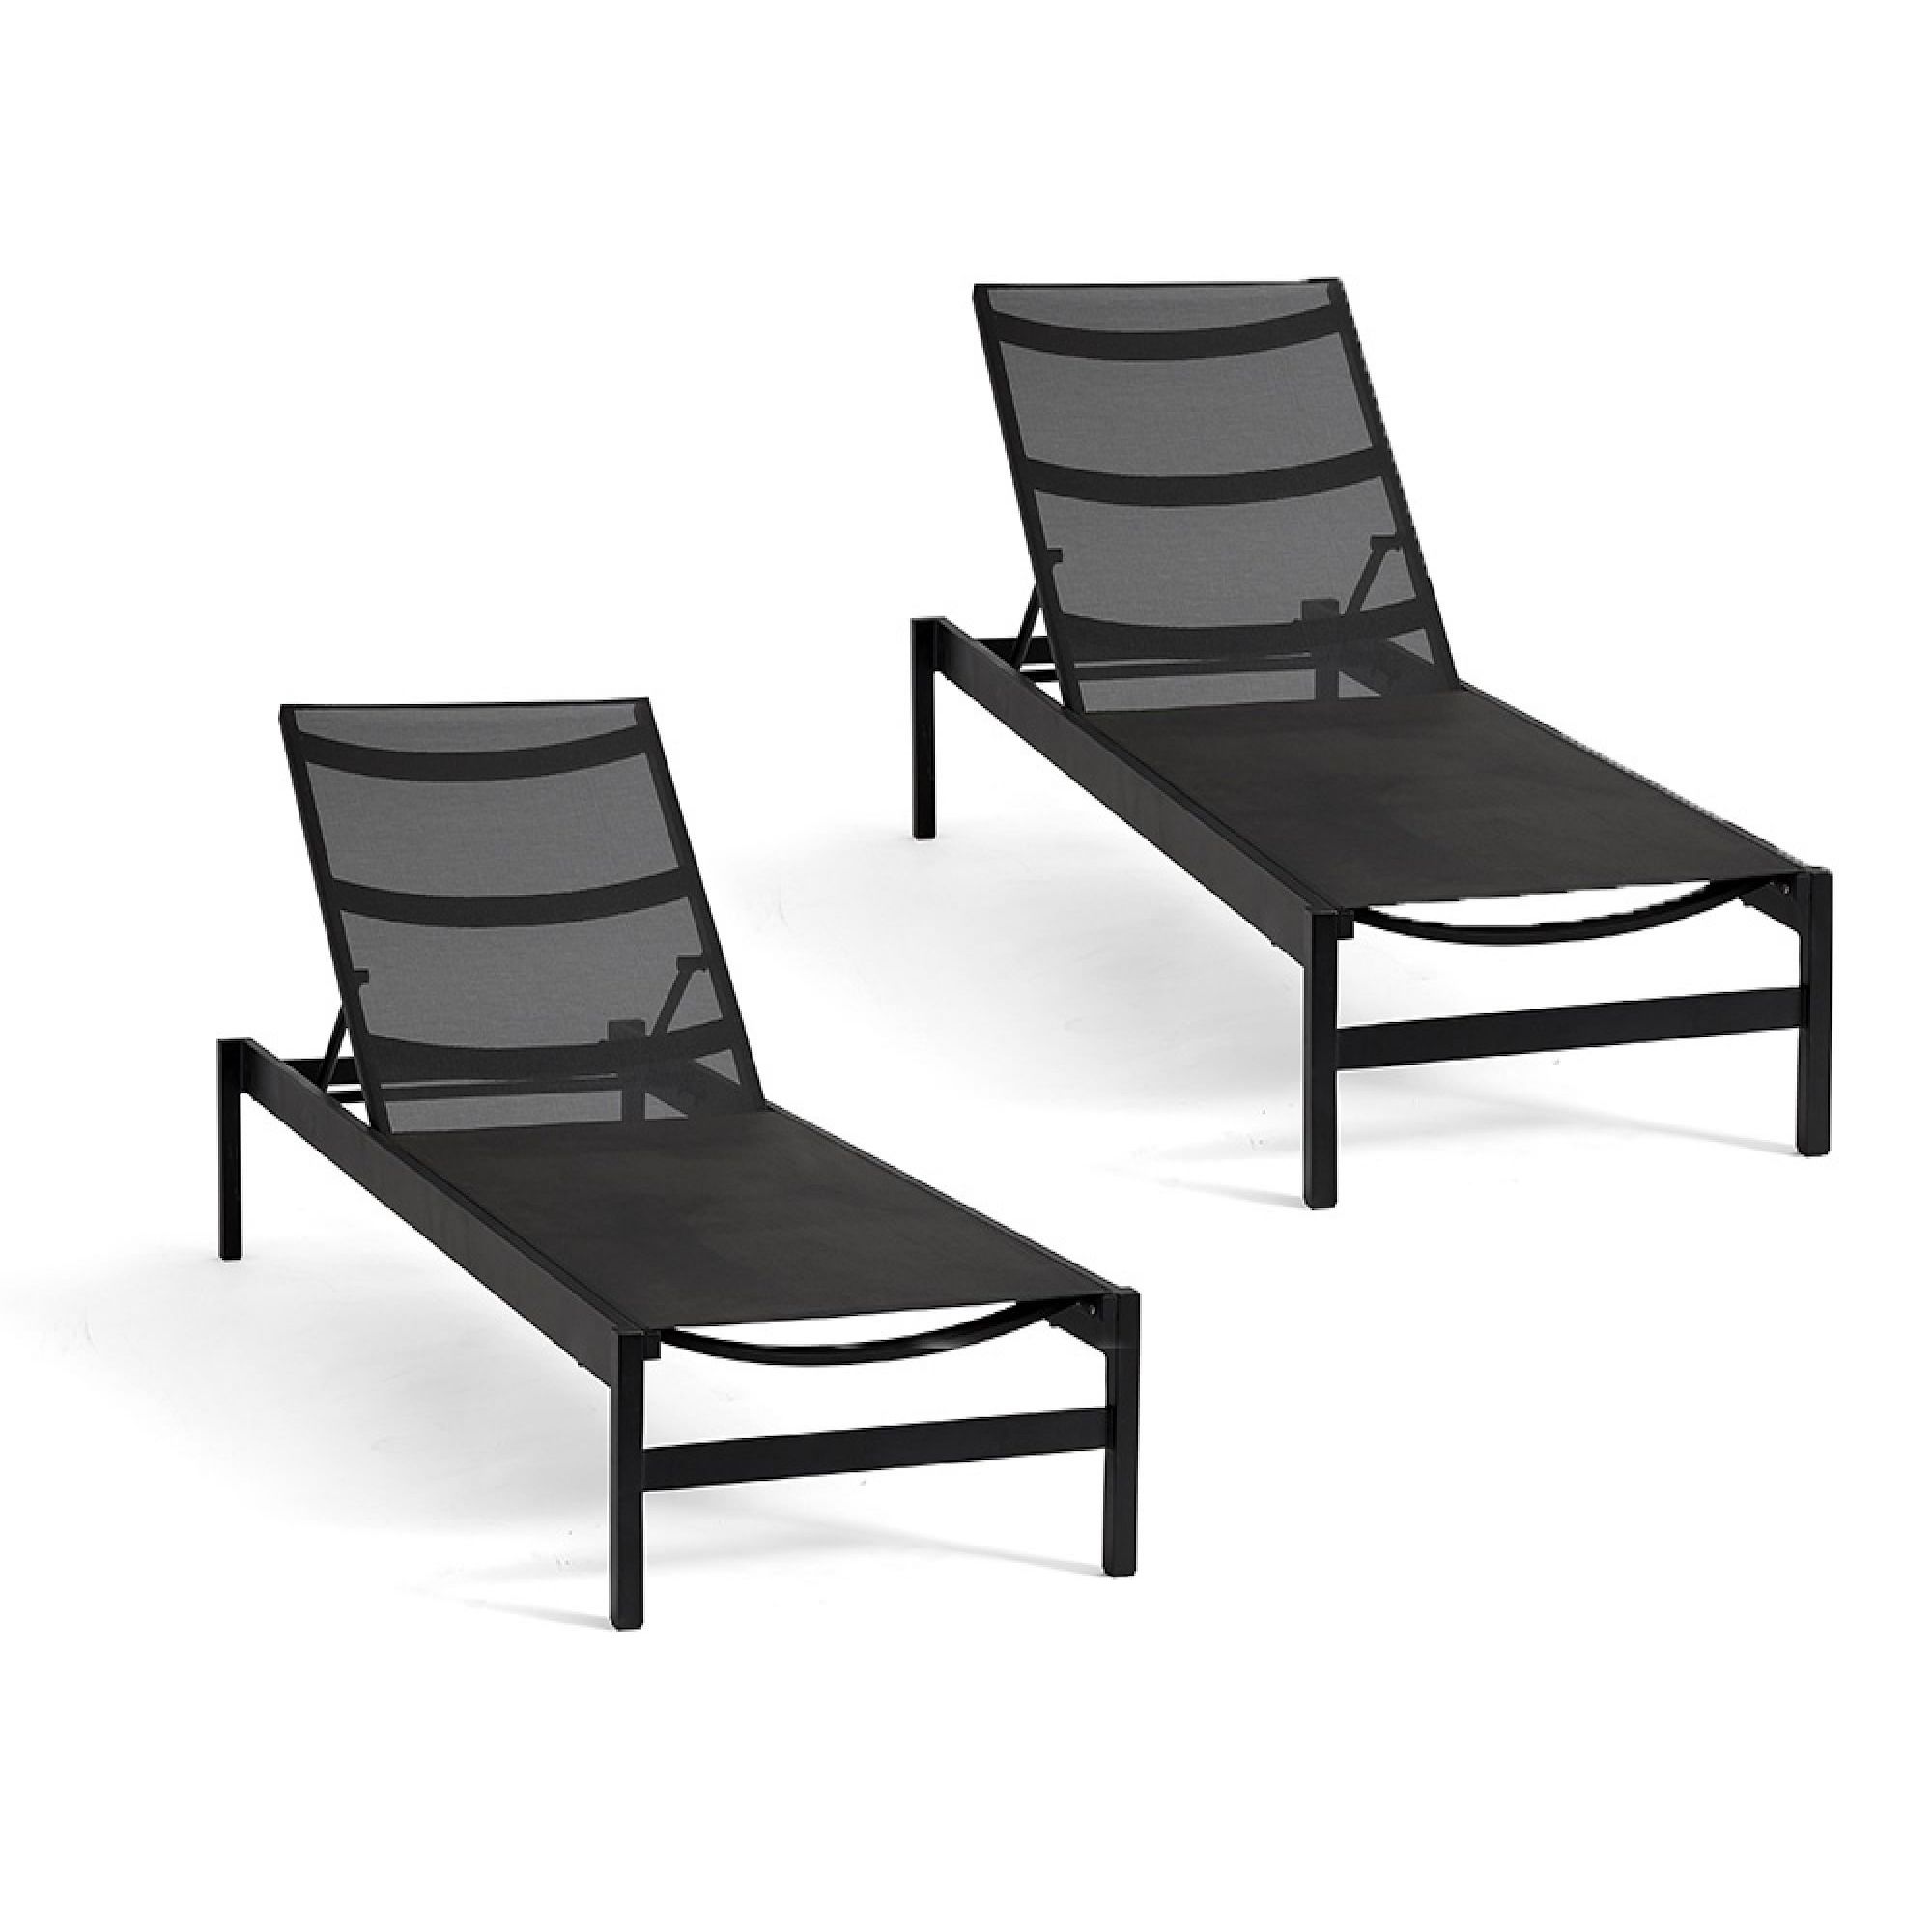 Fiji Mesh Stackable Outdoor Chaise Lounge, Set of 2